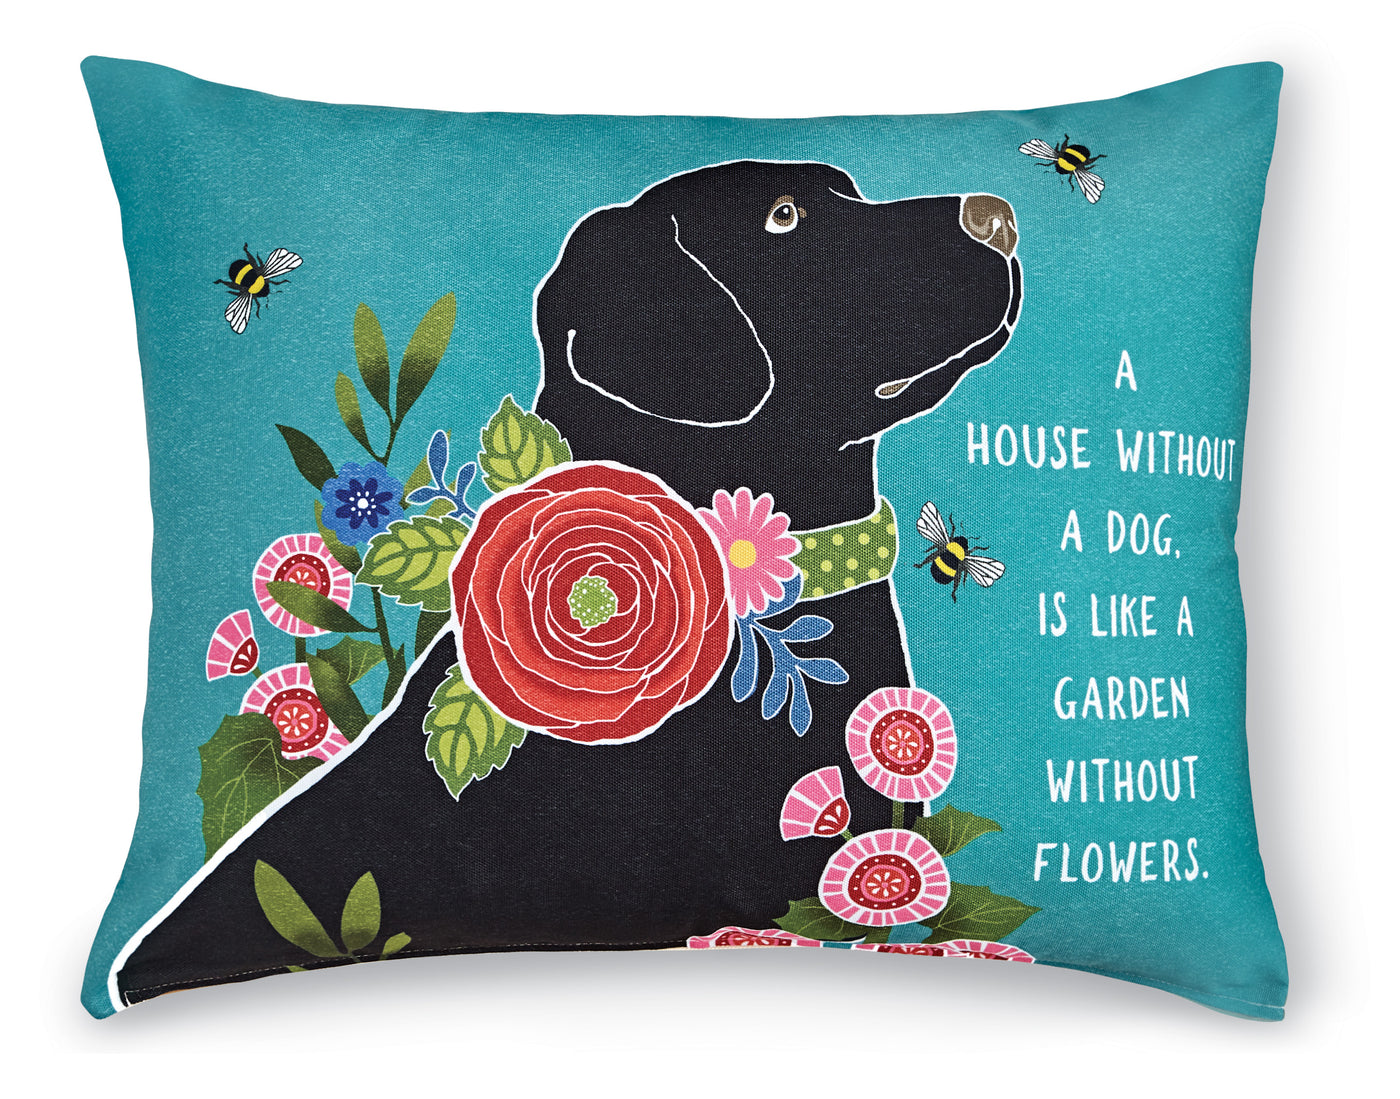 House Without a Dog Pillow